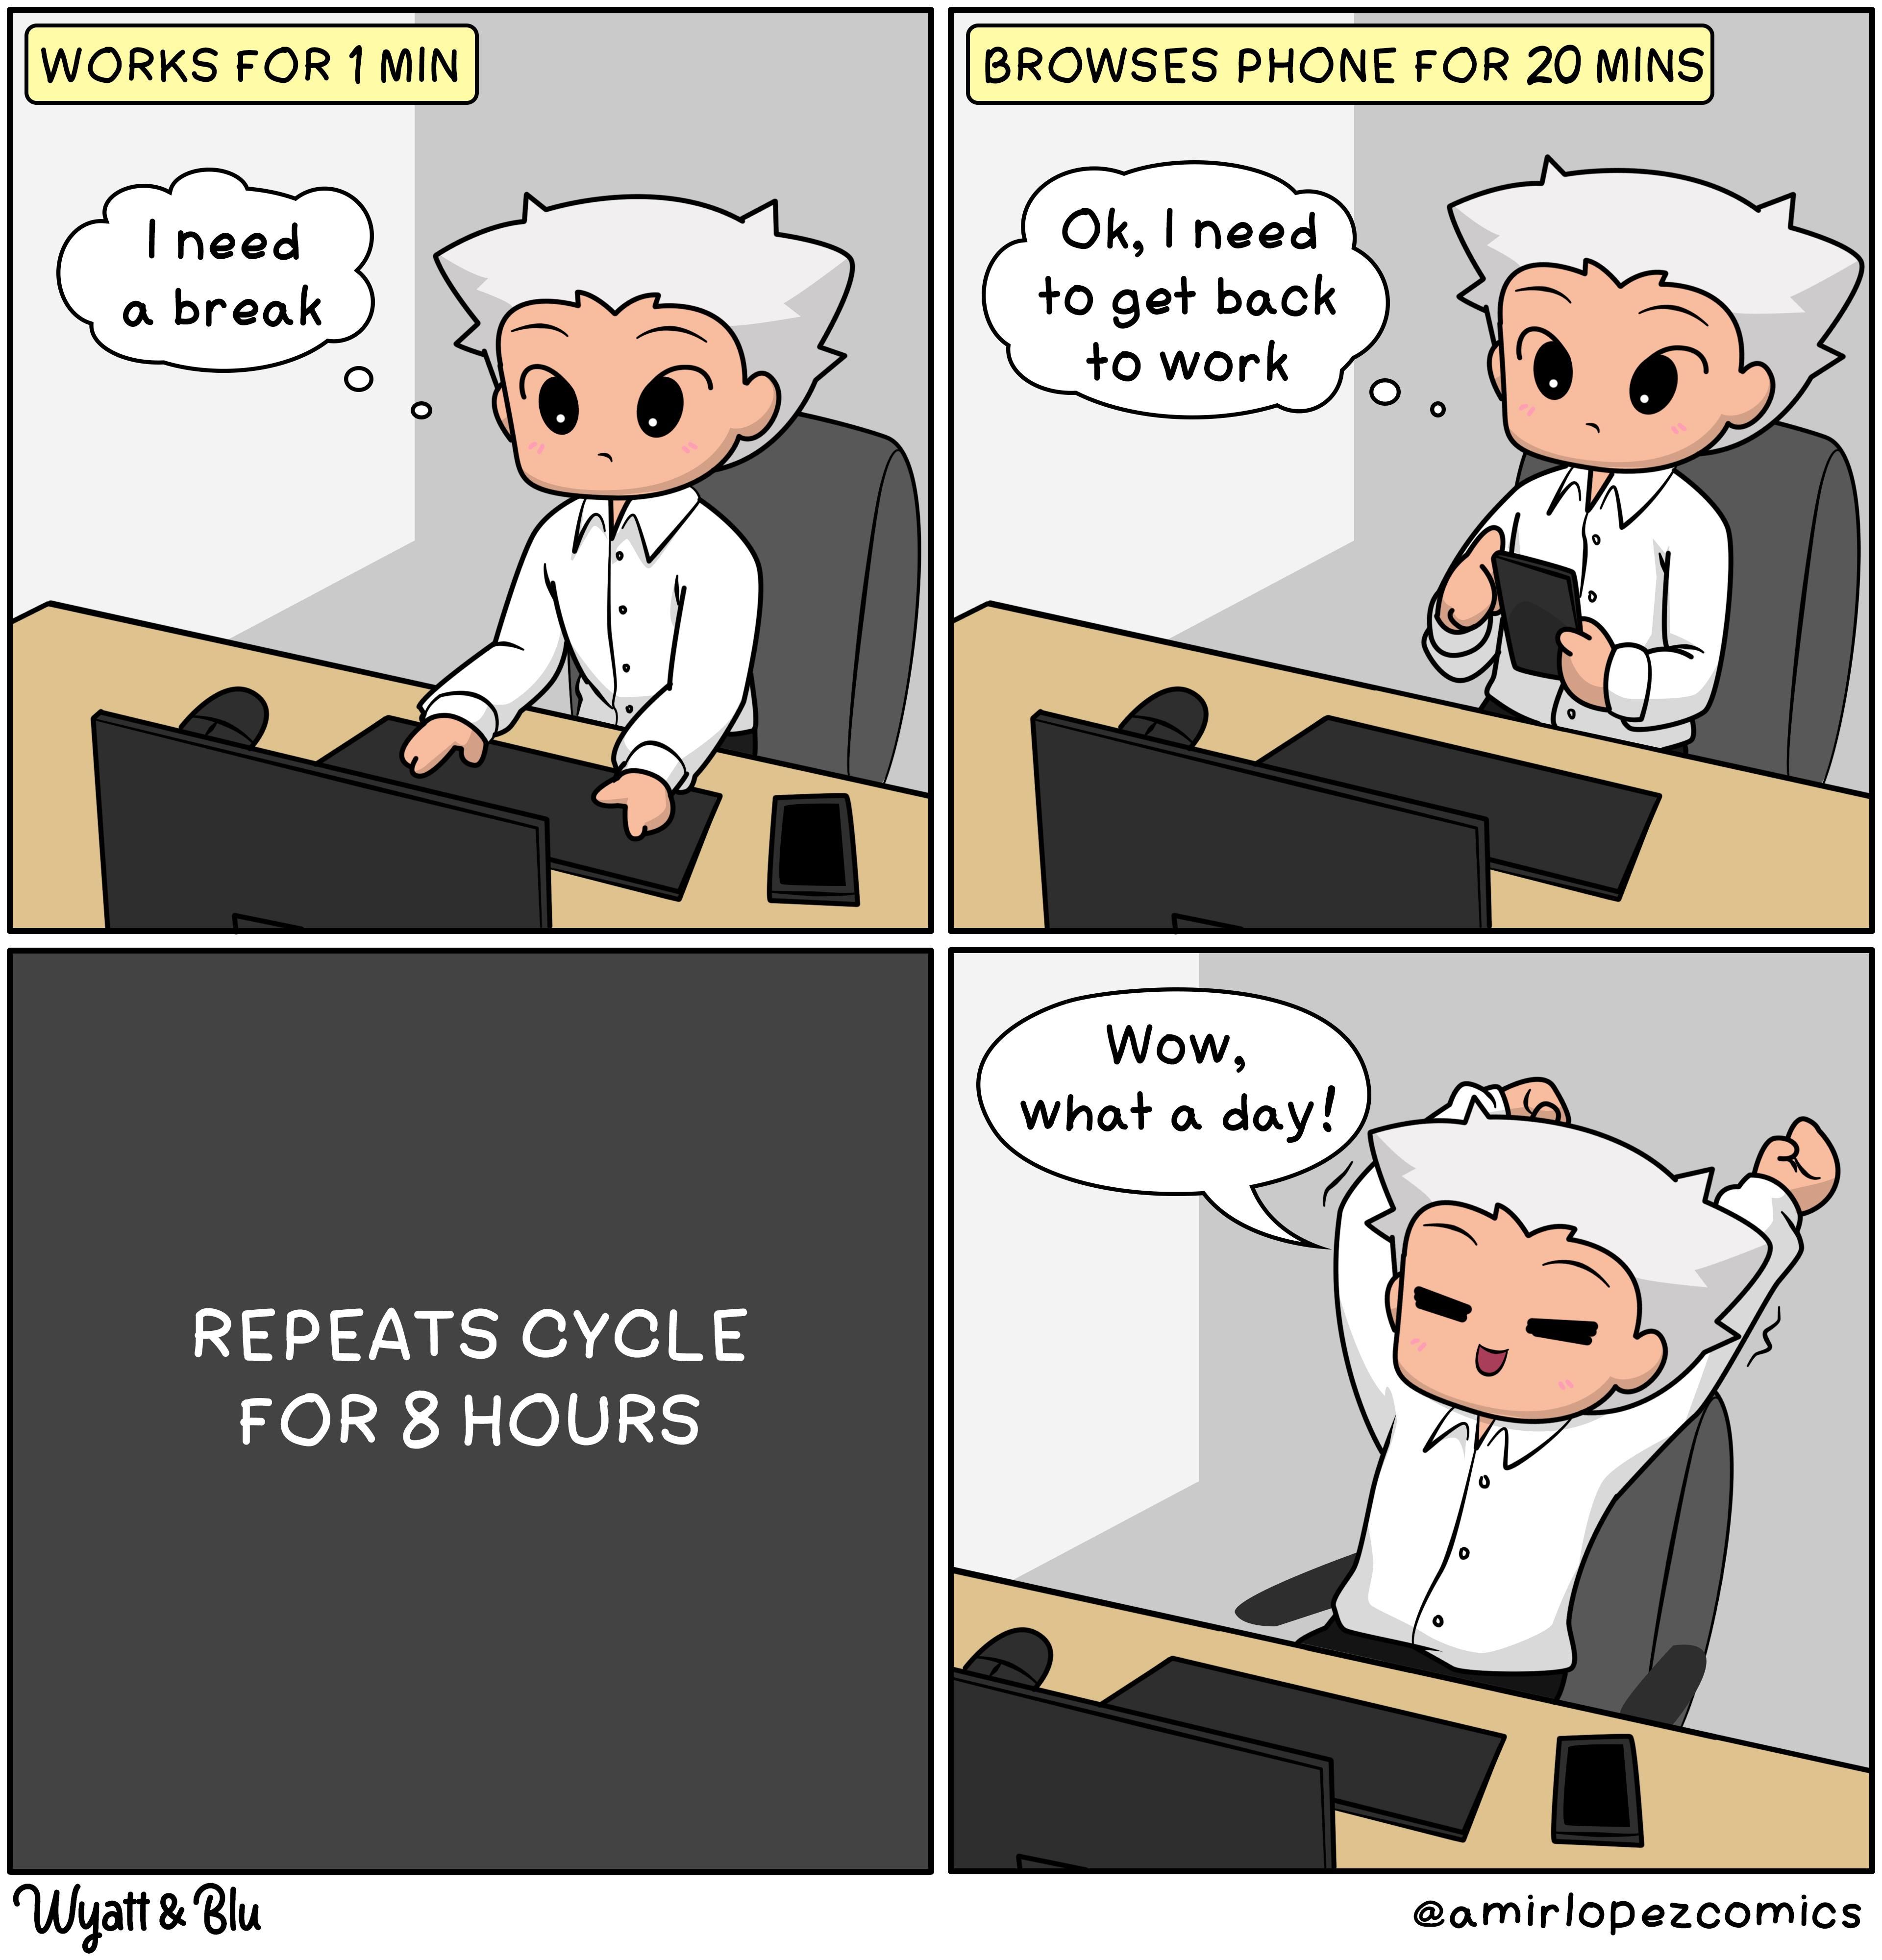 Repeats cycle for 5 days a week